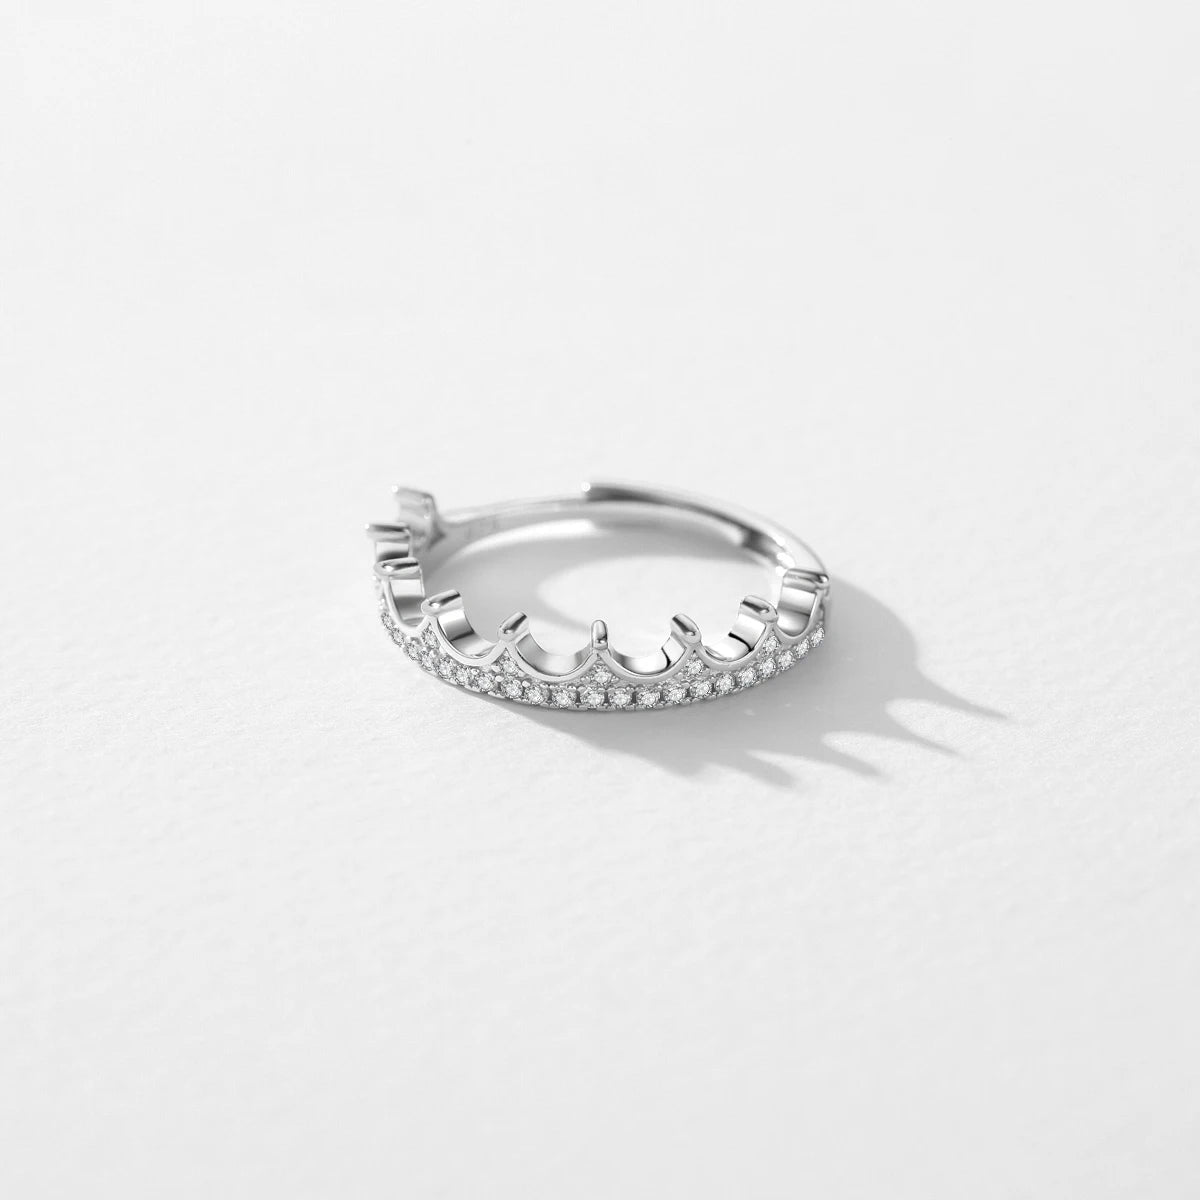 Majestic Crown Adjustable Size Ring